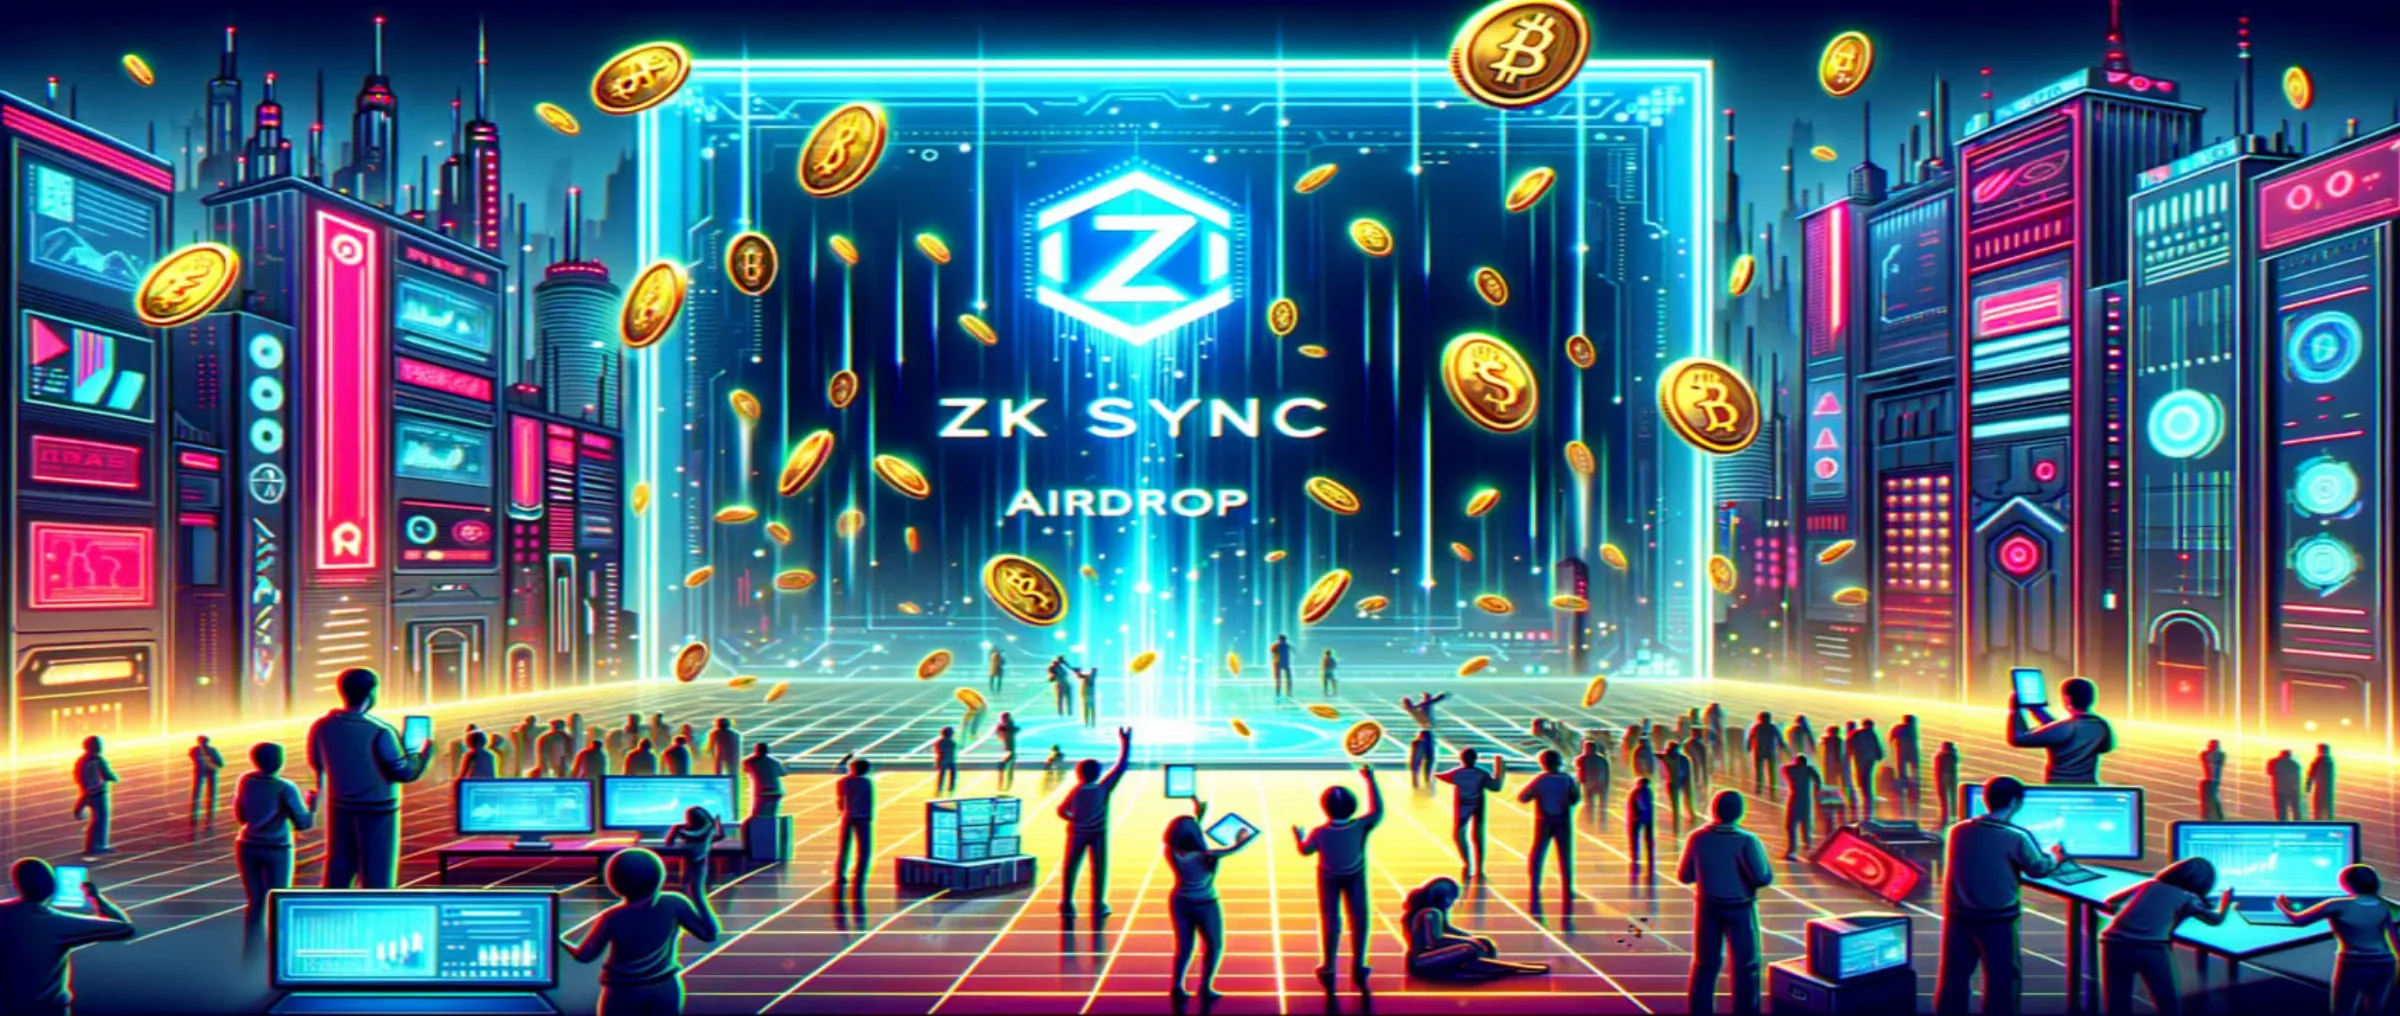 zkSync will conduct an airdrop of 3.6 billion ZK tokens